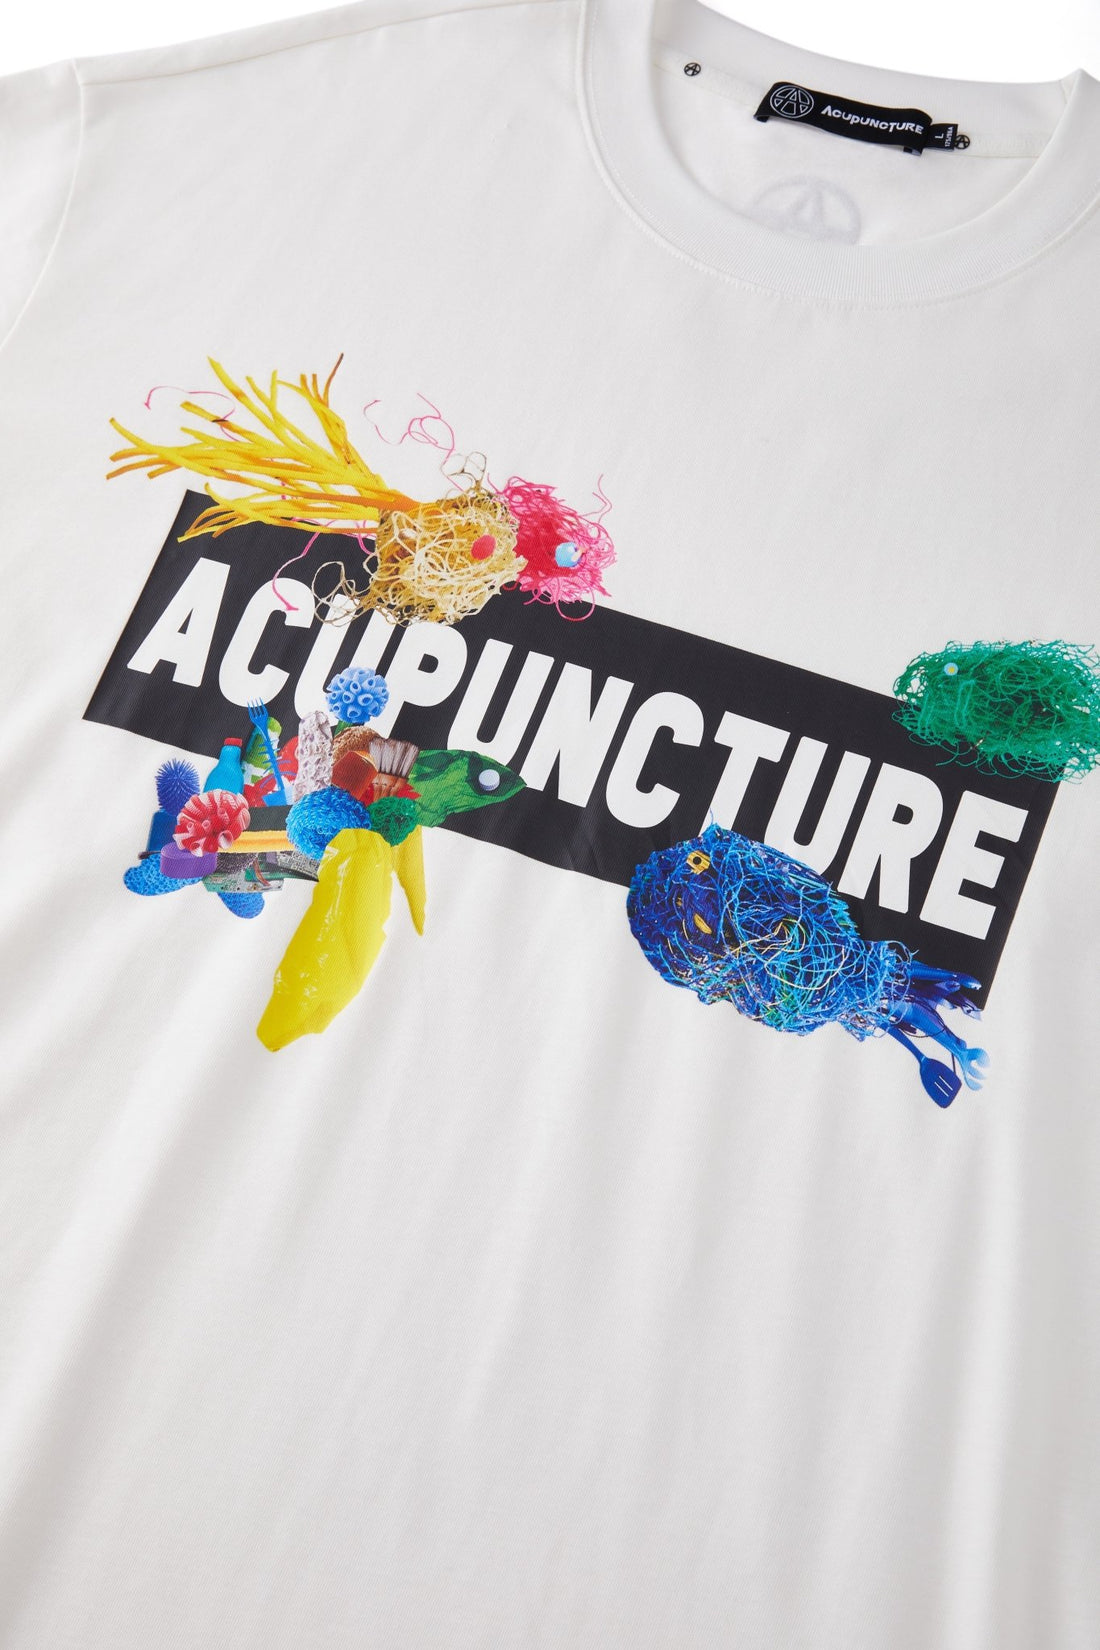 THE POLLUTED TSHIRT WHITE Acupuncture